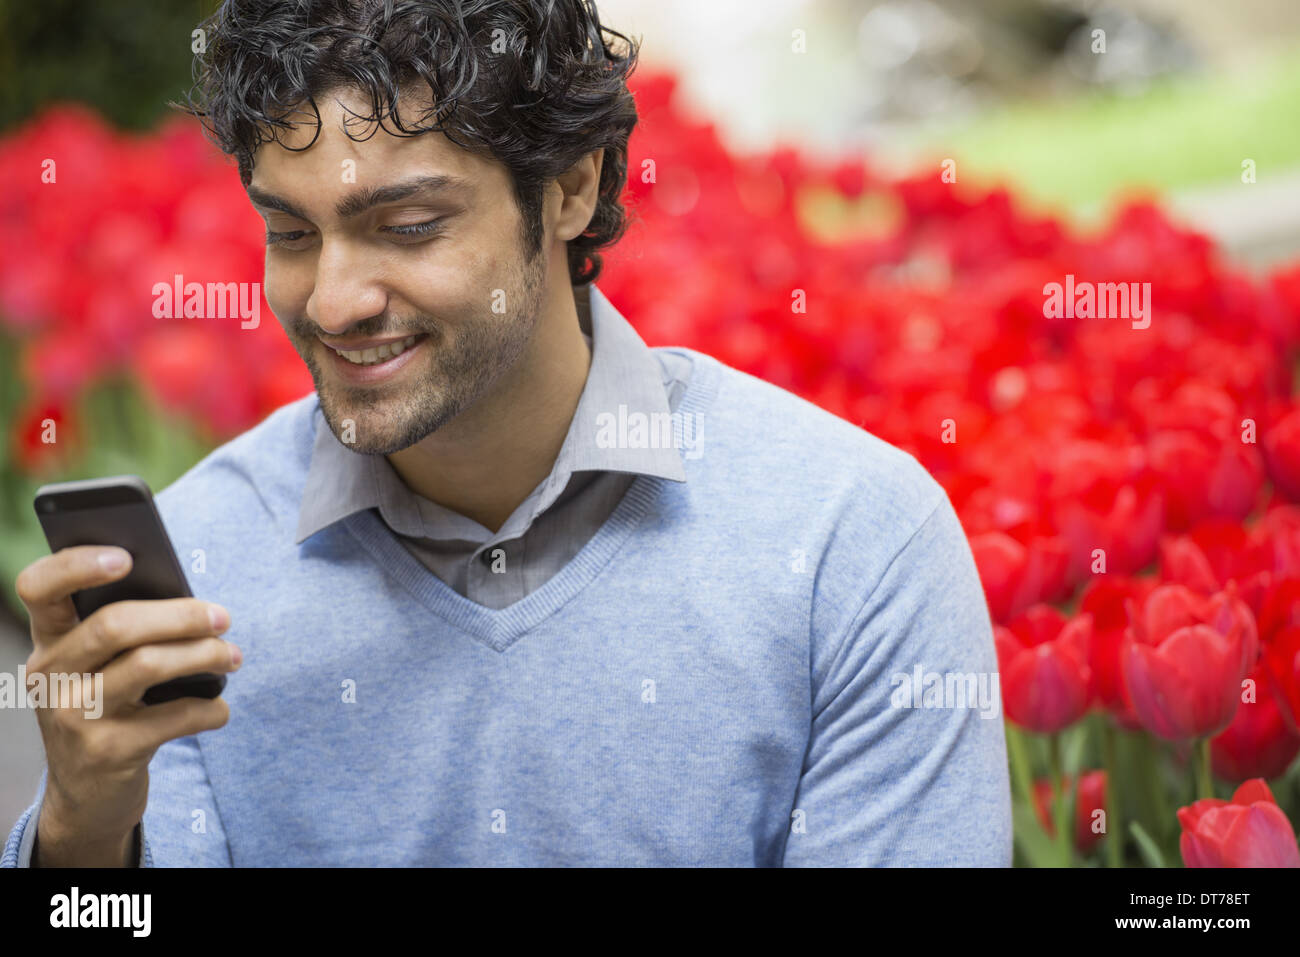 Urban Lifestyle. A man in the park, using his mobile phone. A bed of red flowering tulips in the background. Stock Photo